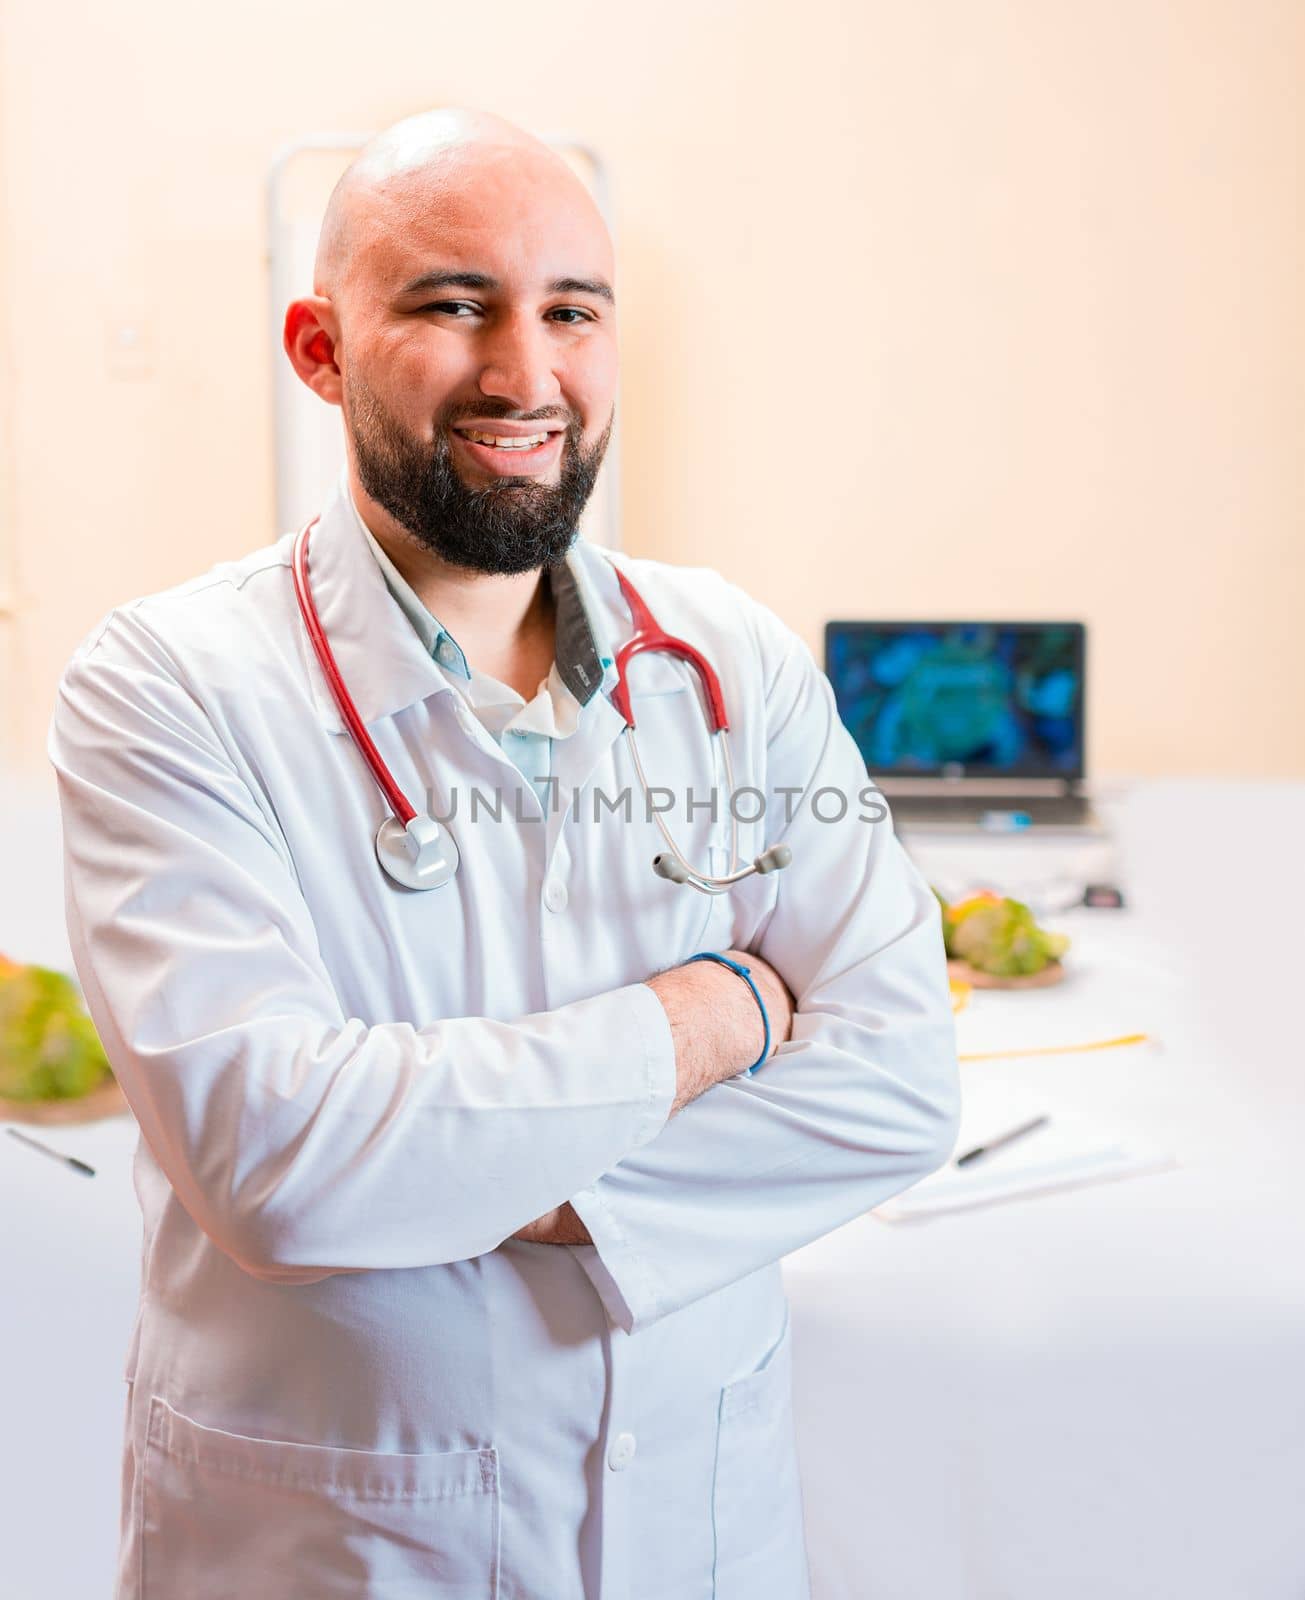 Smiling nutritionist doctor with crossed arms in her office. Portrait of smiling professional nutritionist, Portrait of smiling male nutritionist at his workplace by isaiphoto